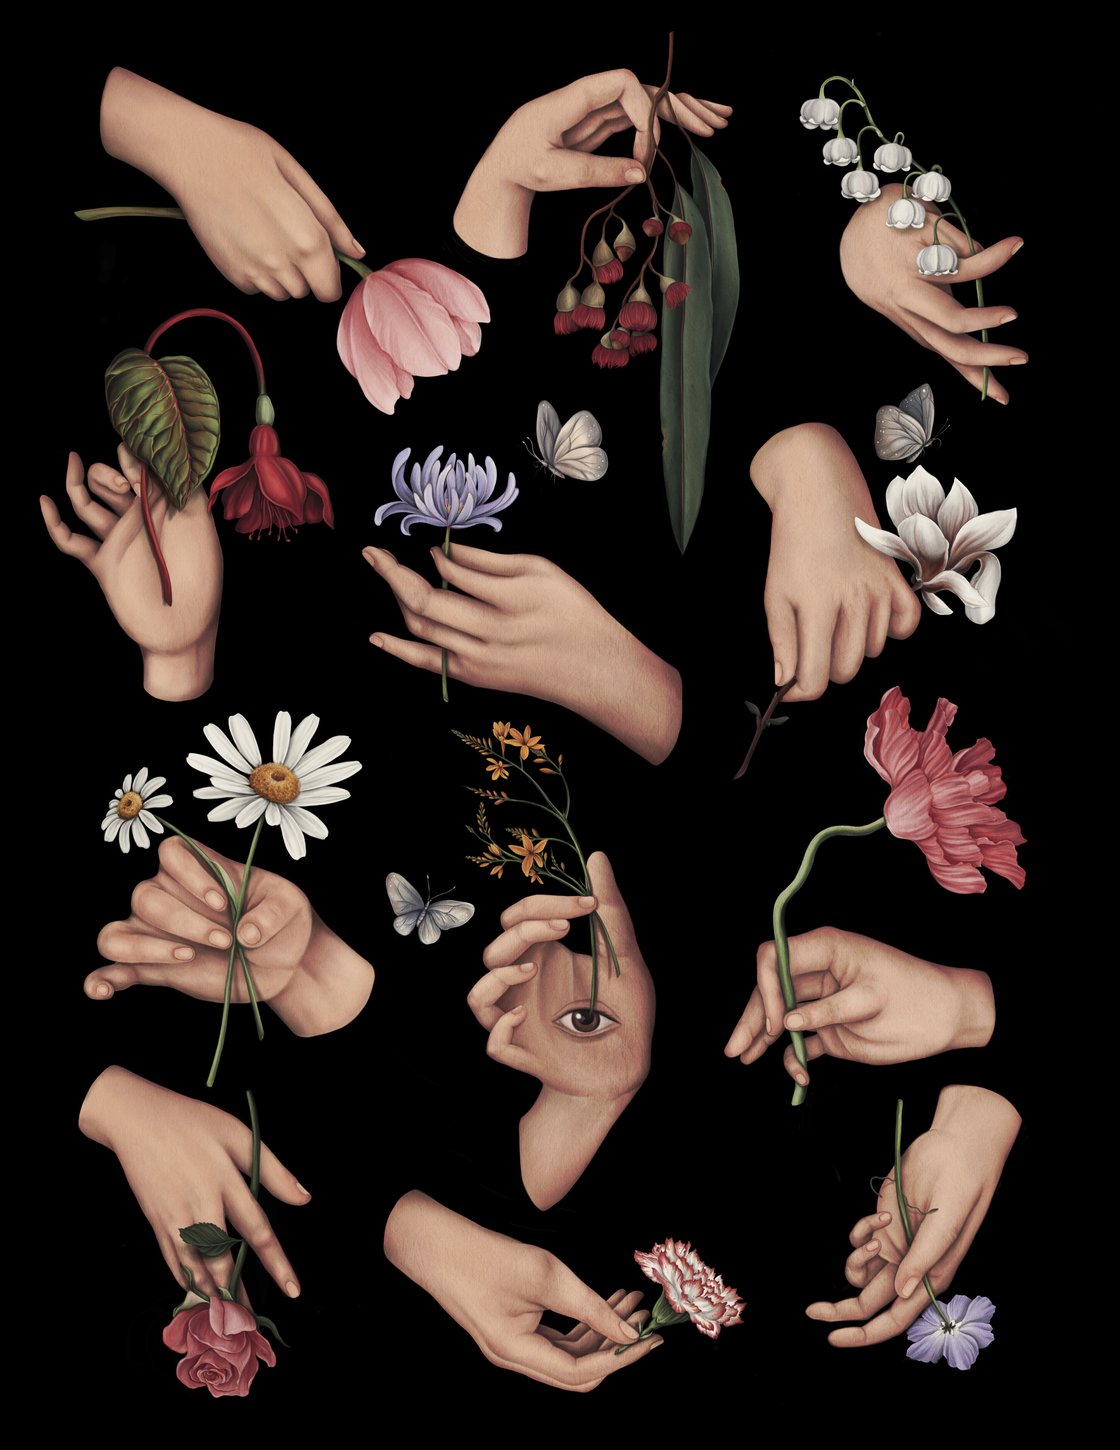 Image of 12 Ways of Holding a Flower Archival Print